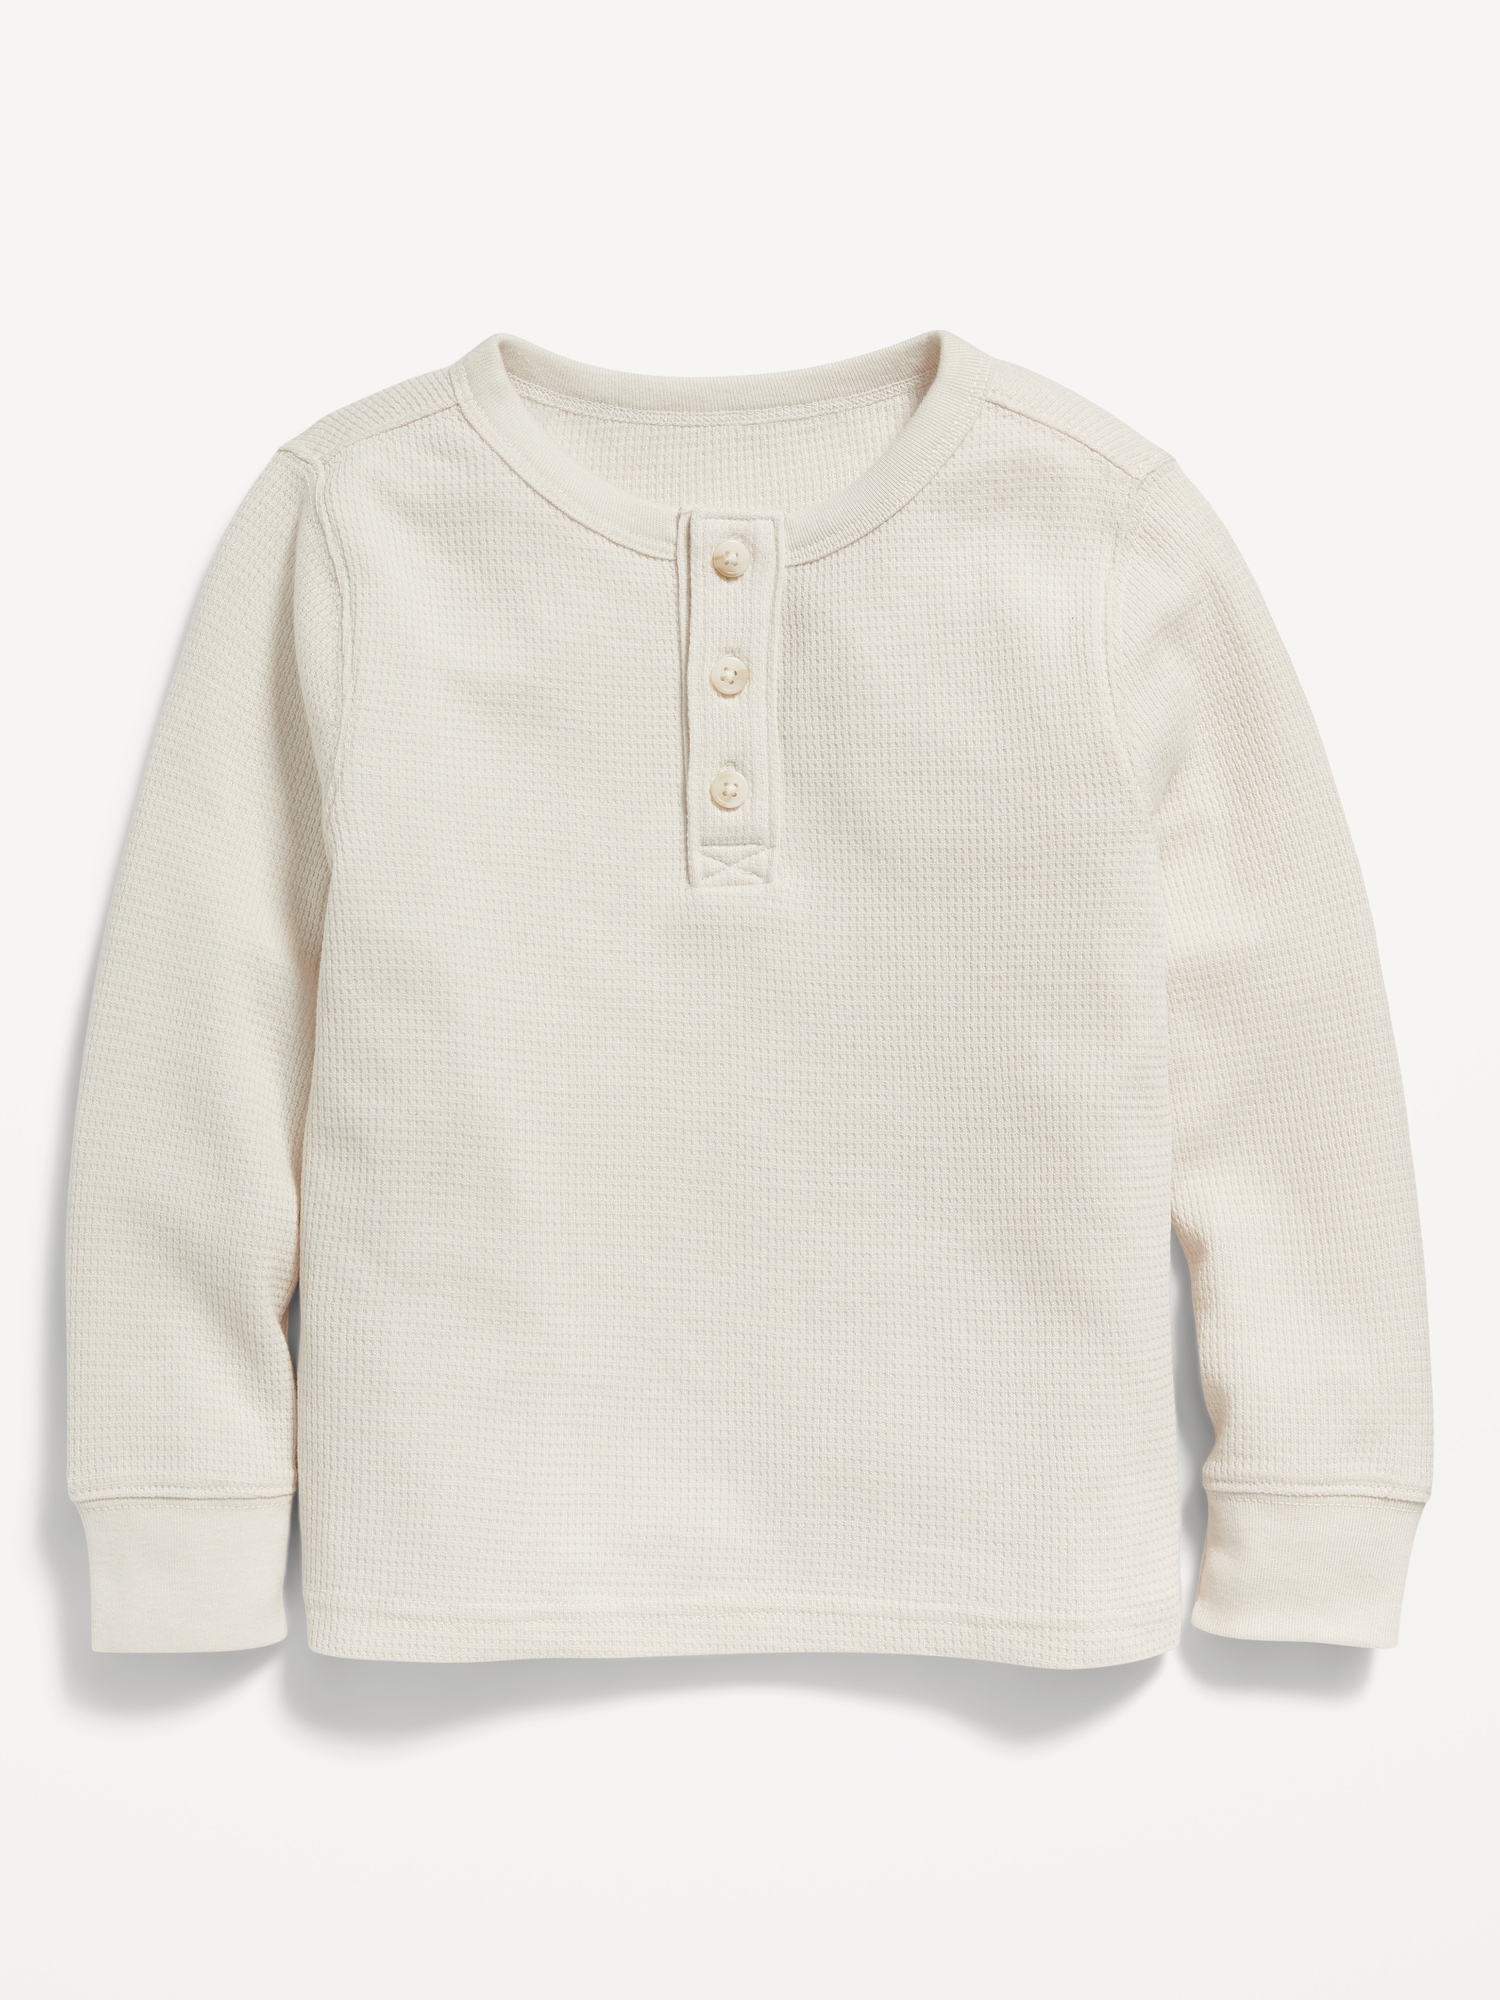 Long-Sleeve Thermal Knit Henley T-Shirt for Toddler Boys